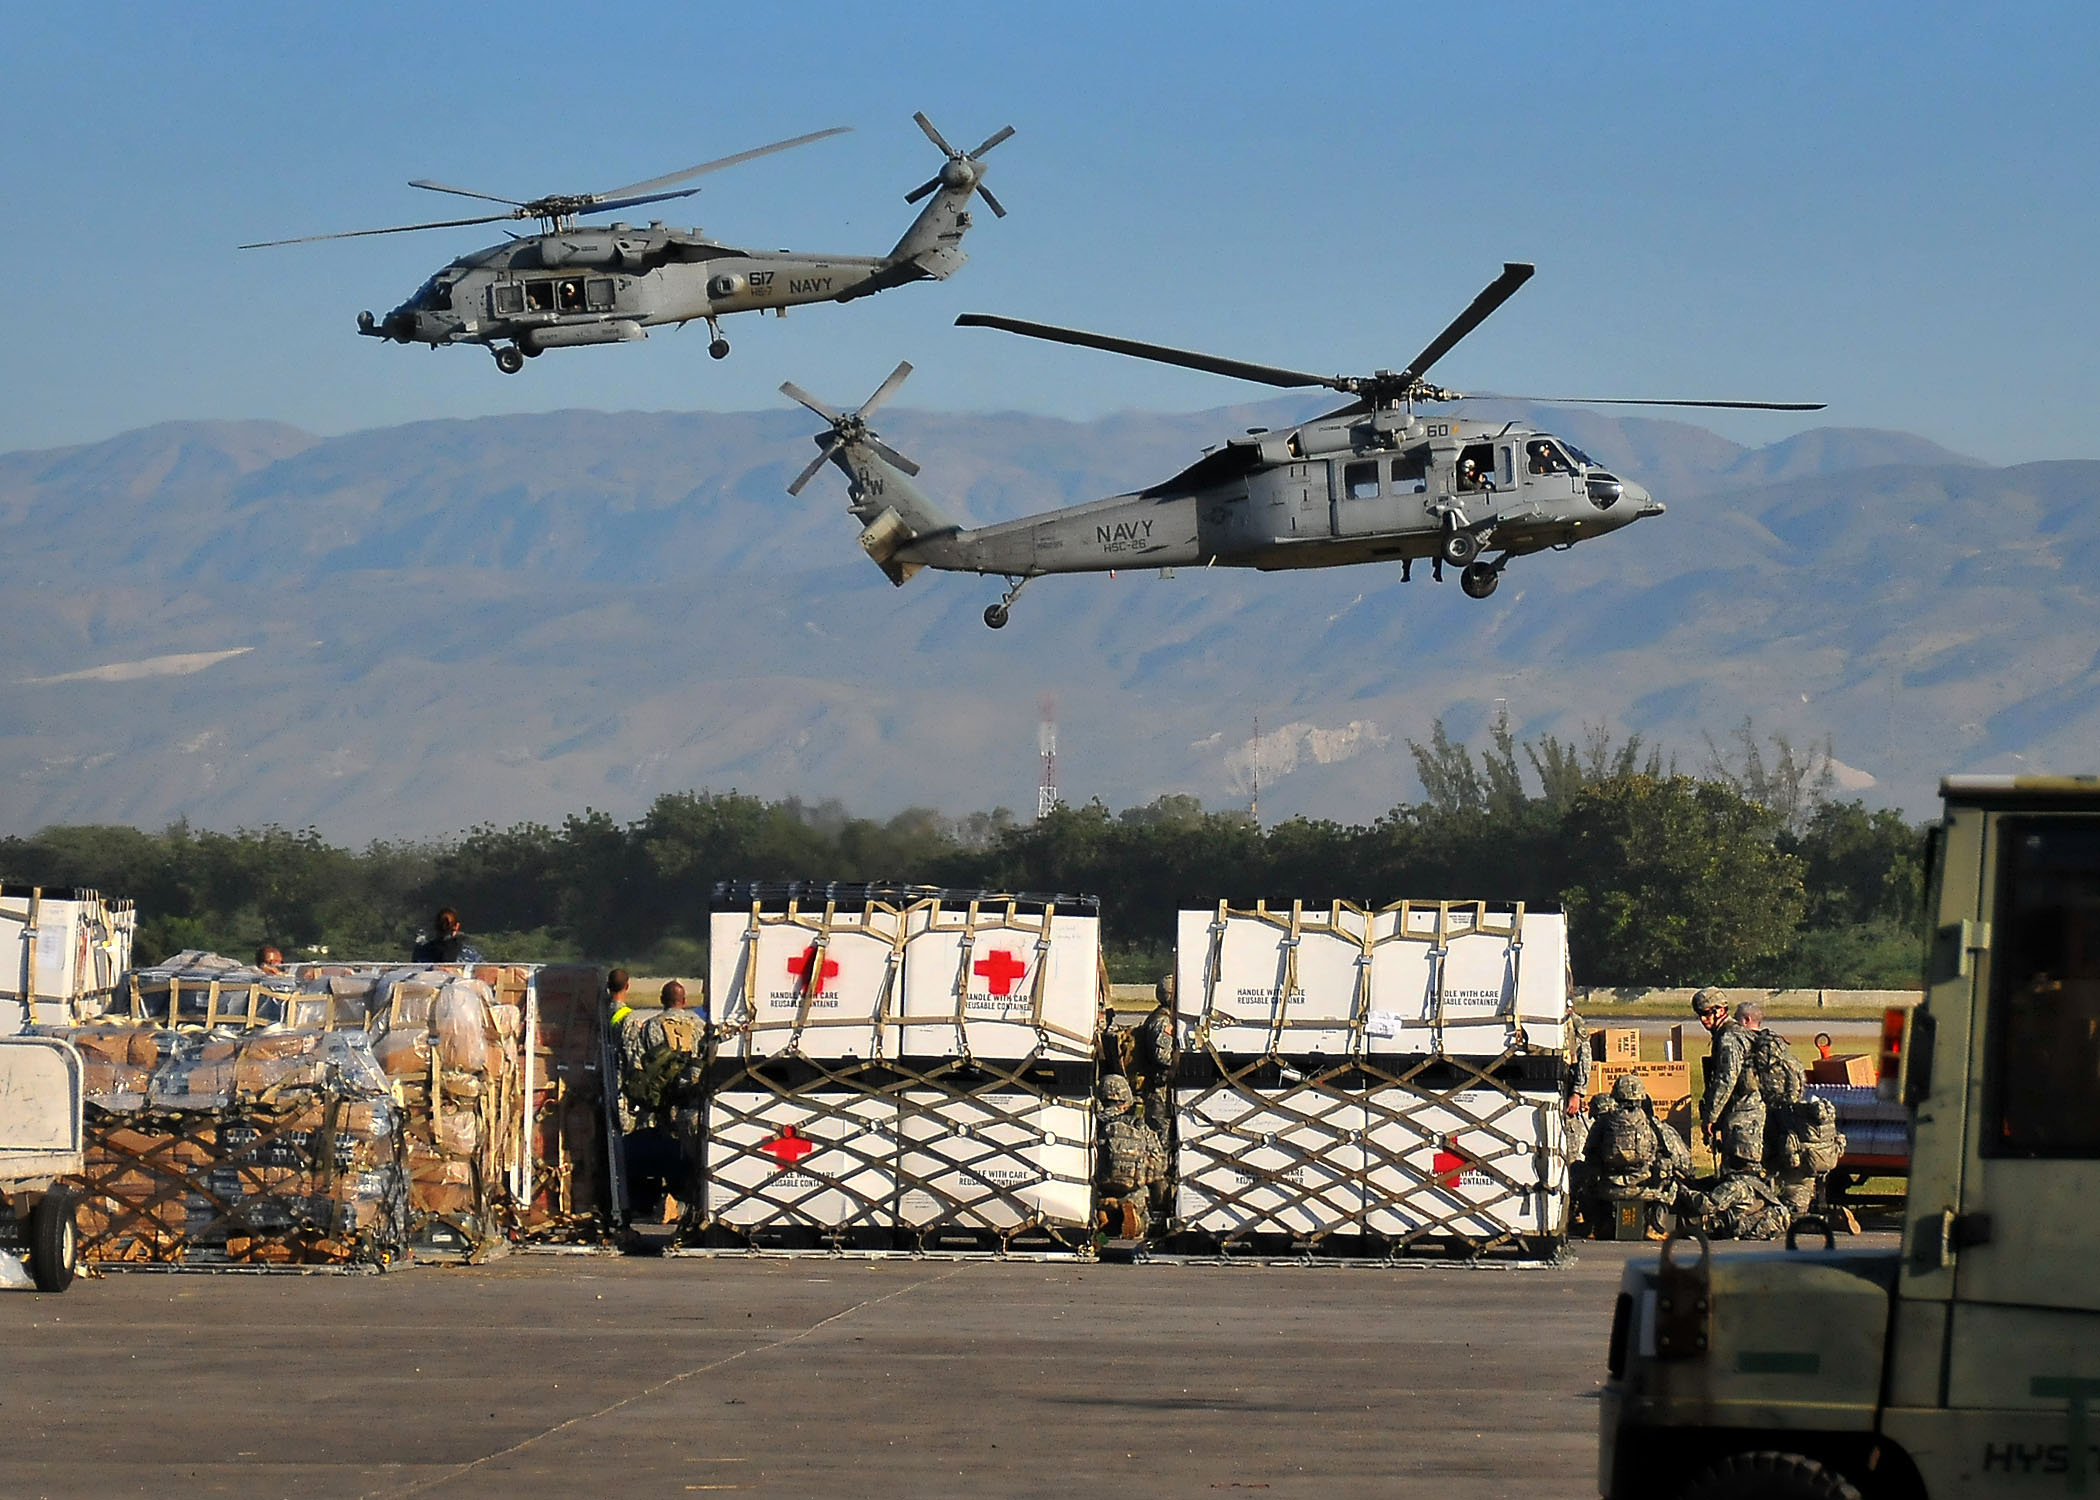 PORT-AU-PRINCE, Haiti  (Jan. 18, 2010) U.S. Navy SH-60F Sea Hawk helicopters from the Nimitz-class aircraft carrier USS Carl Vinson (CVN 70) transport water and supplies from the airport to areas around Port-au-Prince. Carl Vinson and Carrier Air Wing (CVW) 17 are conducting humanitarian and disaster relief operations as part of Operation Unified Response after a 7.0 magnitude earthquake caused severe damage near Port-au-Prince on Jan. 12, 2010. (U.S. Navy photo by Mass Communication Specialist 2nd Class Daniel Barker/Released)